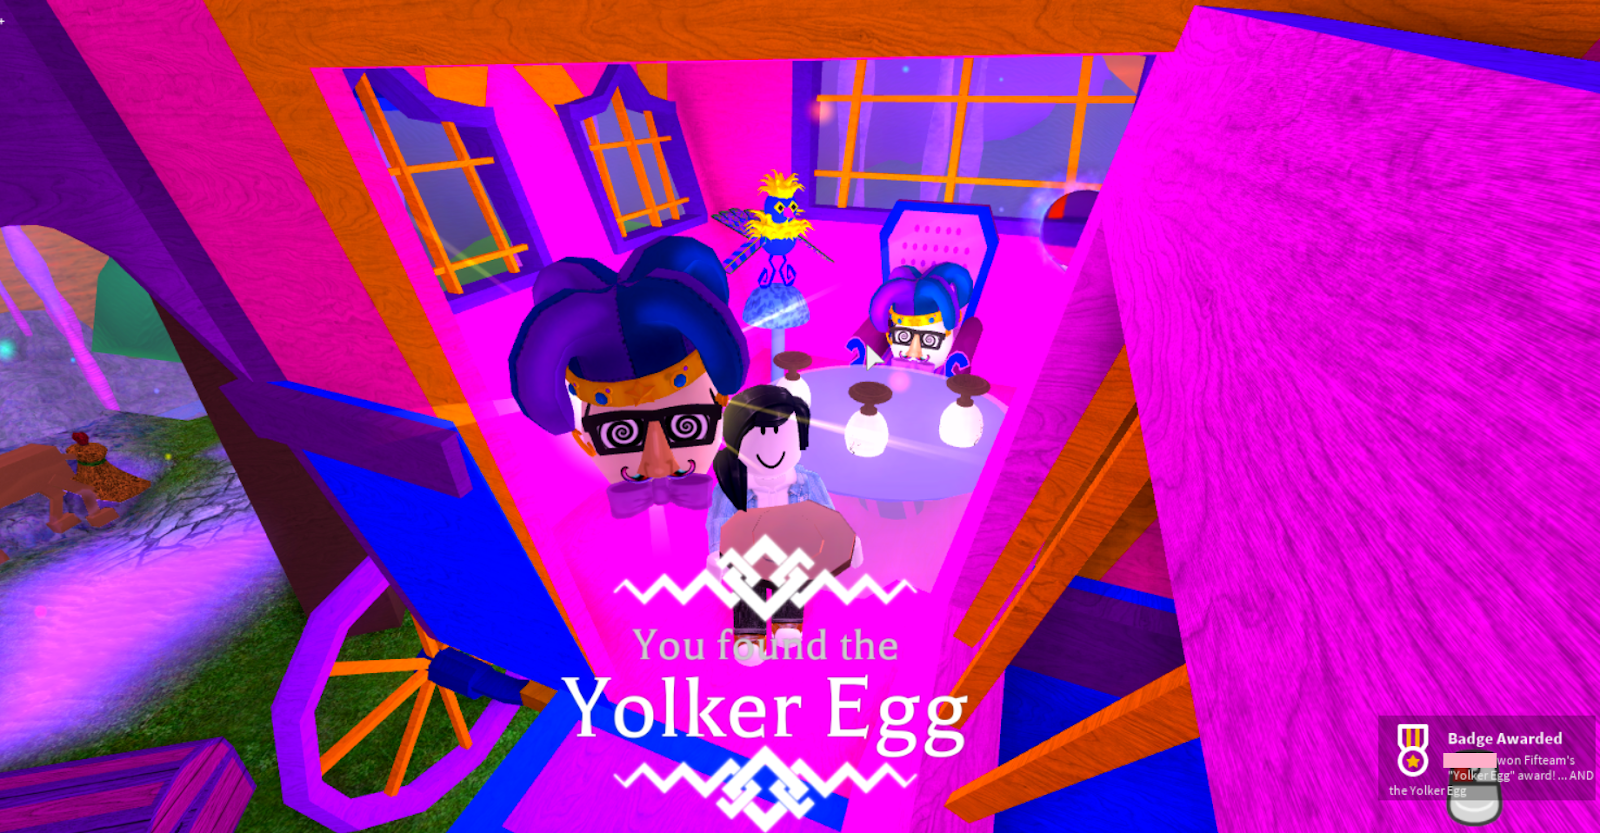 Aveyn S Blog Roblox Egg Hunt 2018 How To Find All The Eggs In Wonderland Grove - roblox egg hunt 2018 all ticket locations